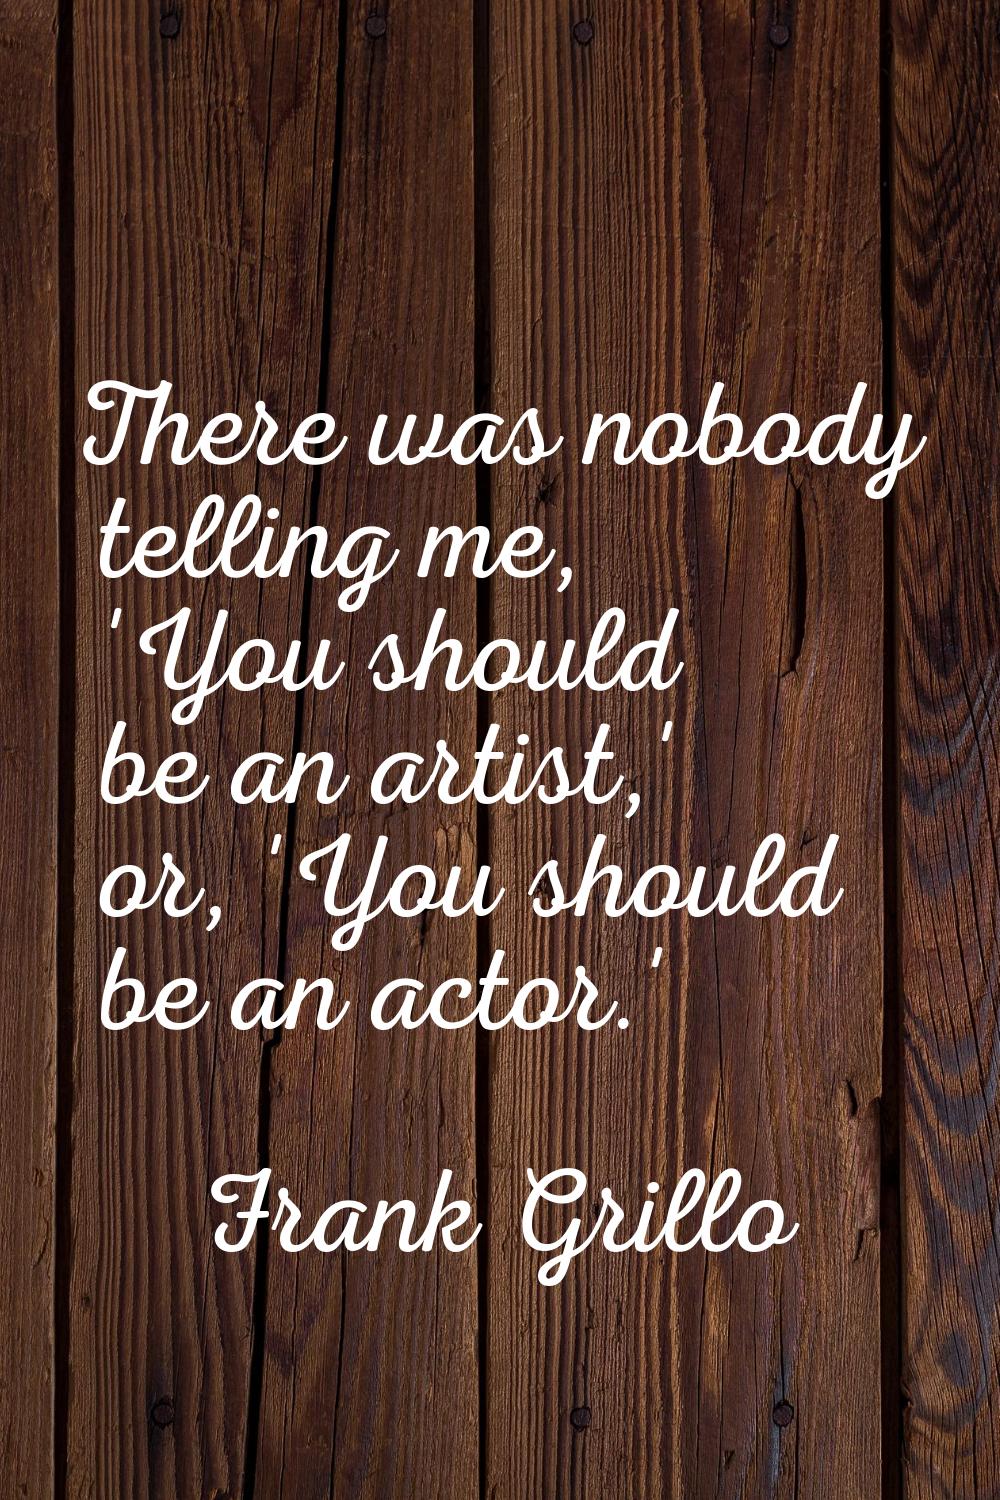 There was nobody telling me, 'You should be an artist,' or, 'You should be an actor.'